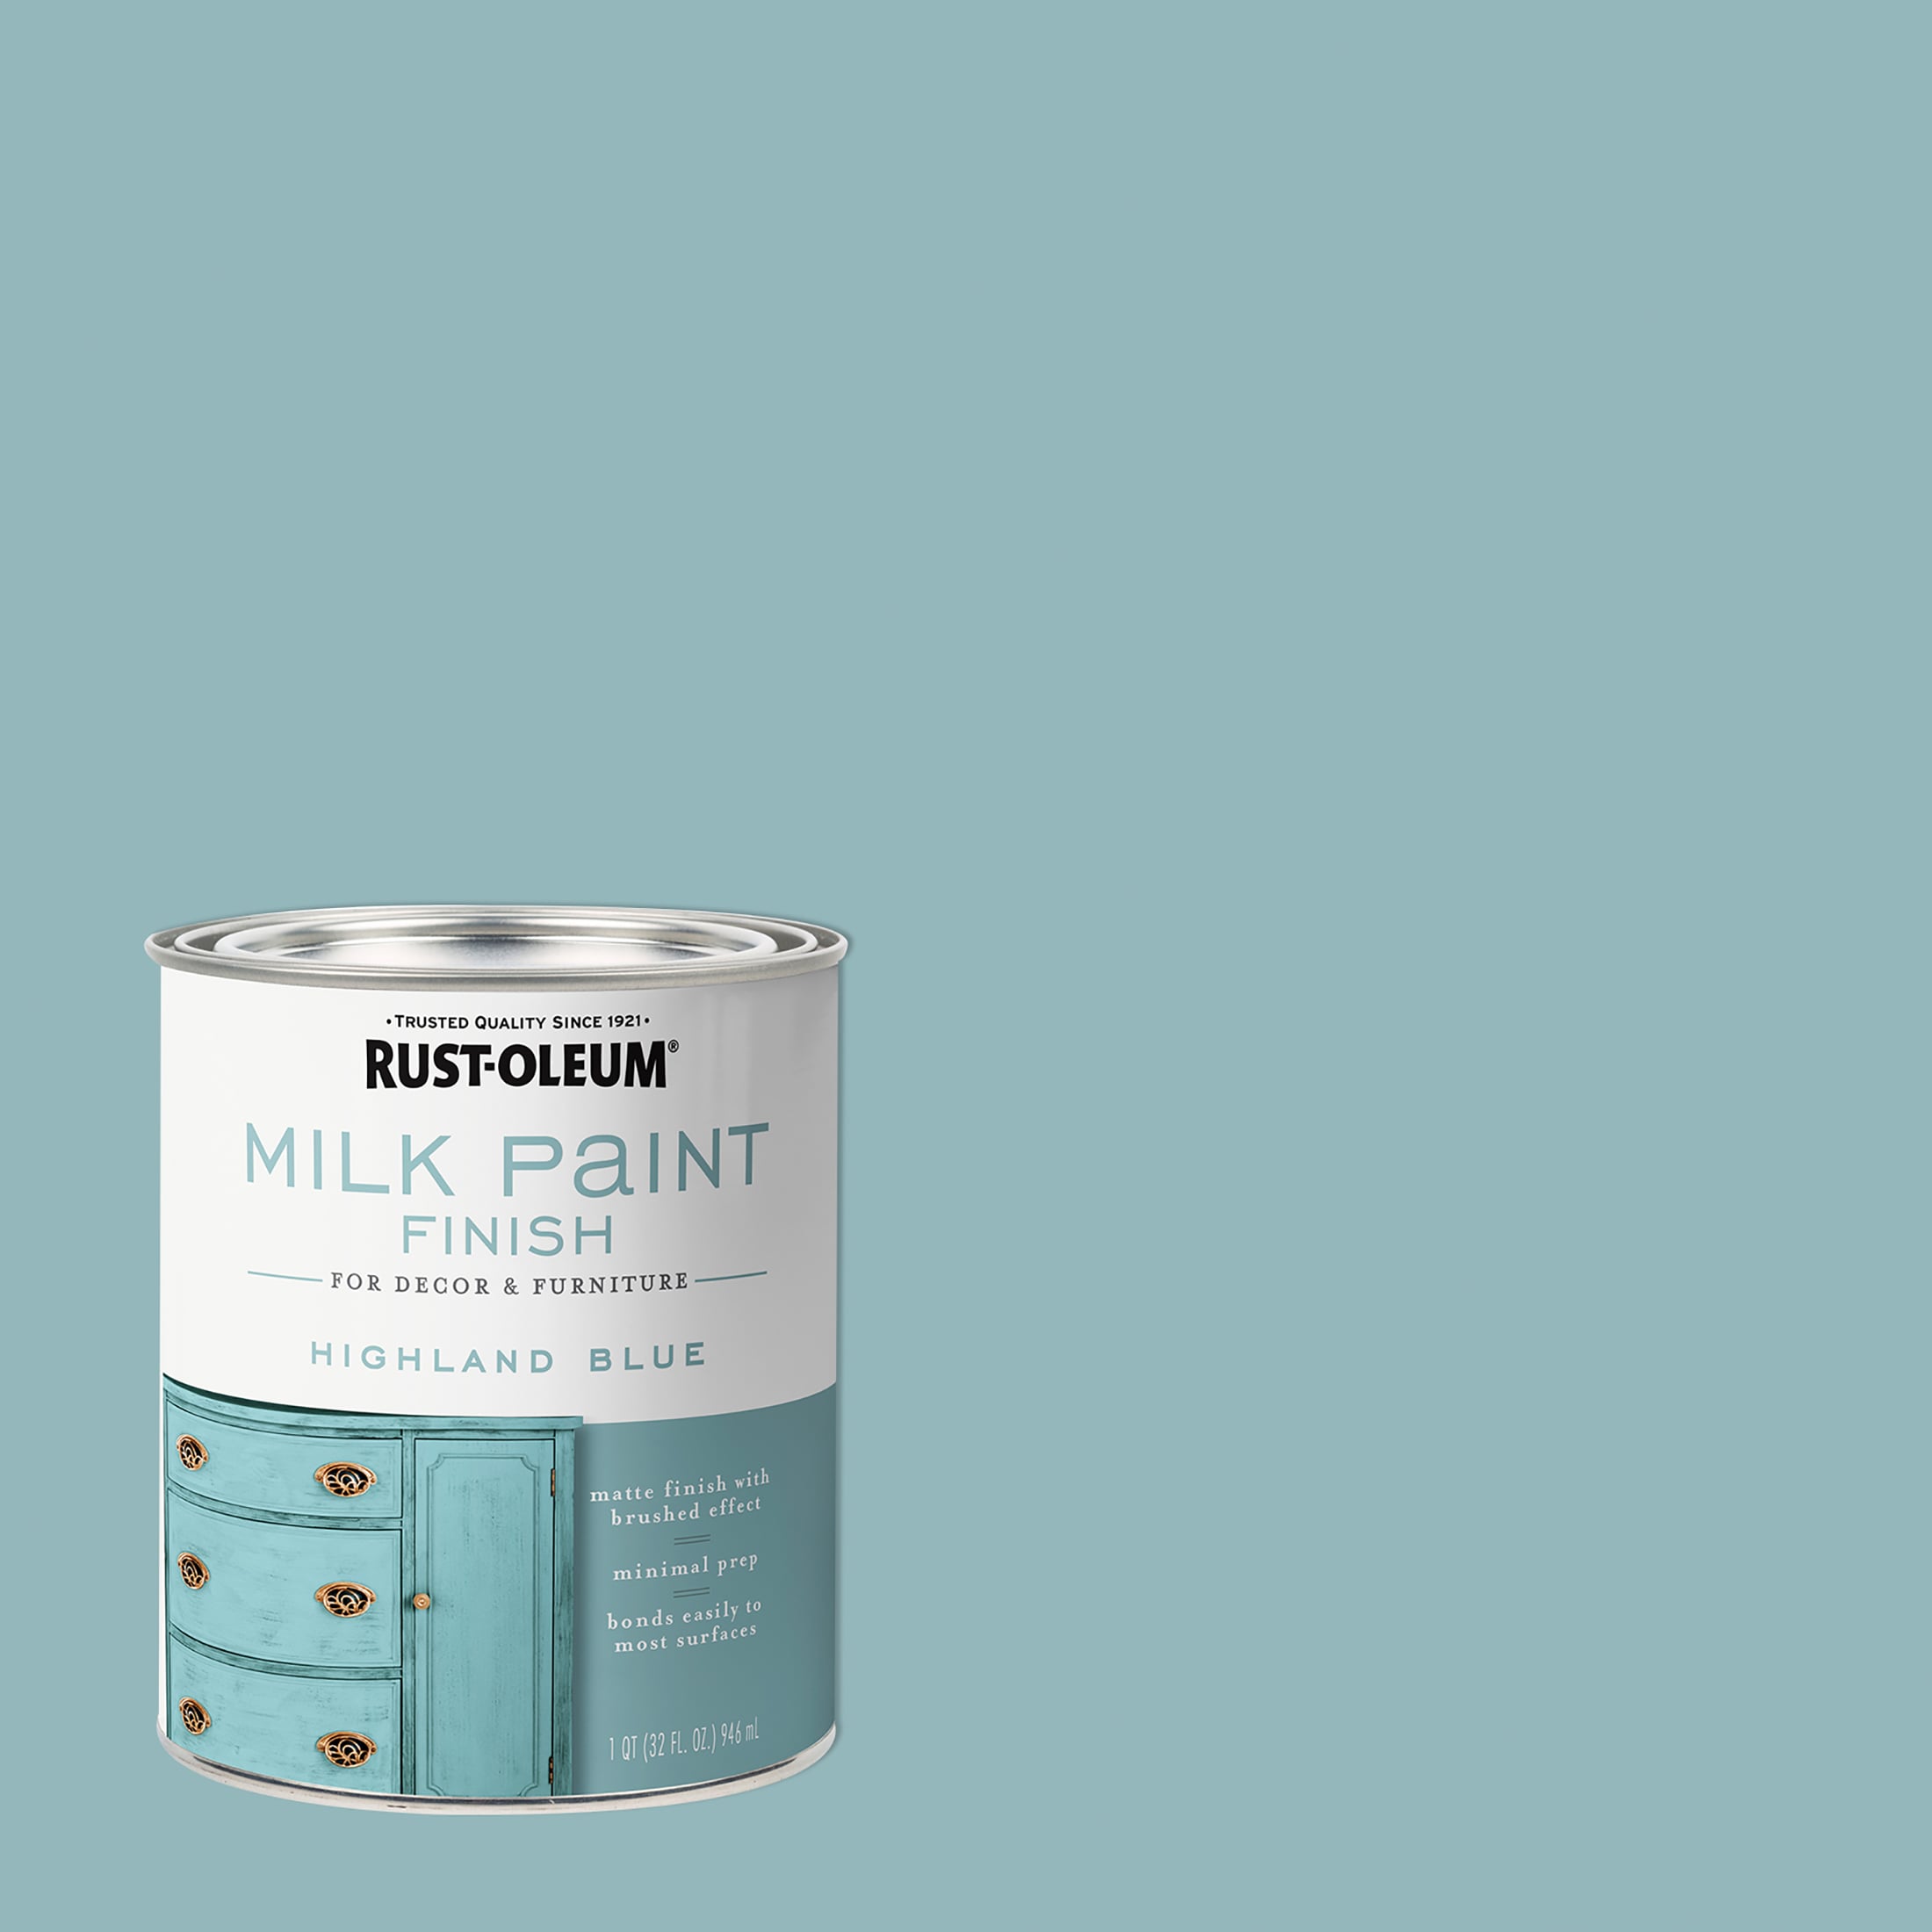 Real Milk Paint, Wood Paint for Furniture, Matte Paint for Cabinets, Walls,  Brick, and Stone, Water Based Organic, No VOC, Plum, 1 Quart